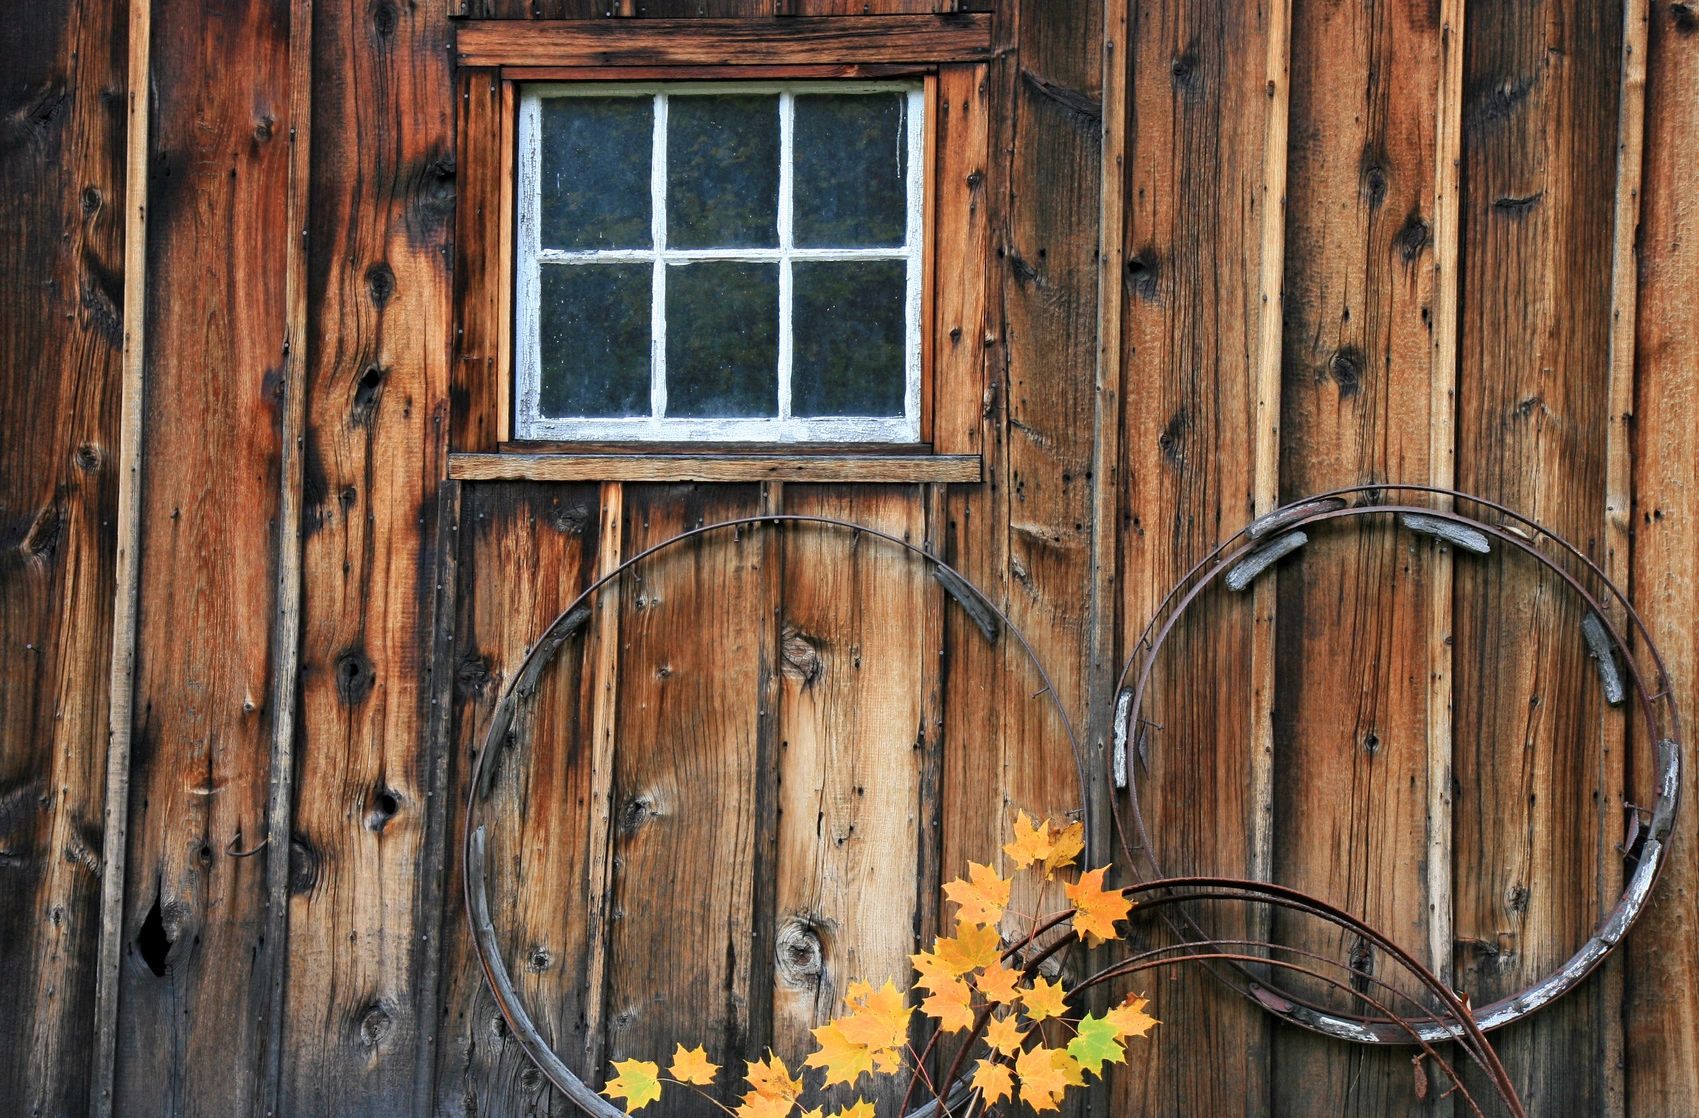 Rustic Building With Small Six Pane Window And Old Wheels In Lake Benton Minnesota